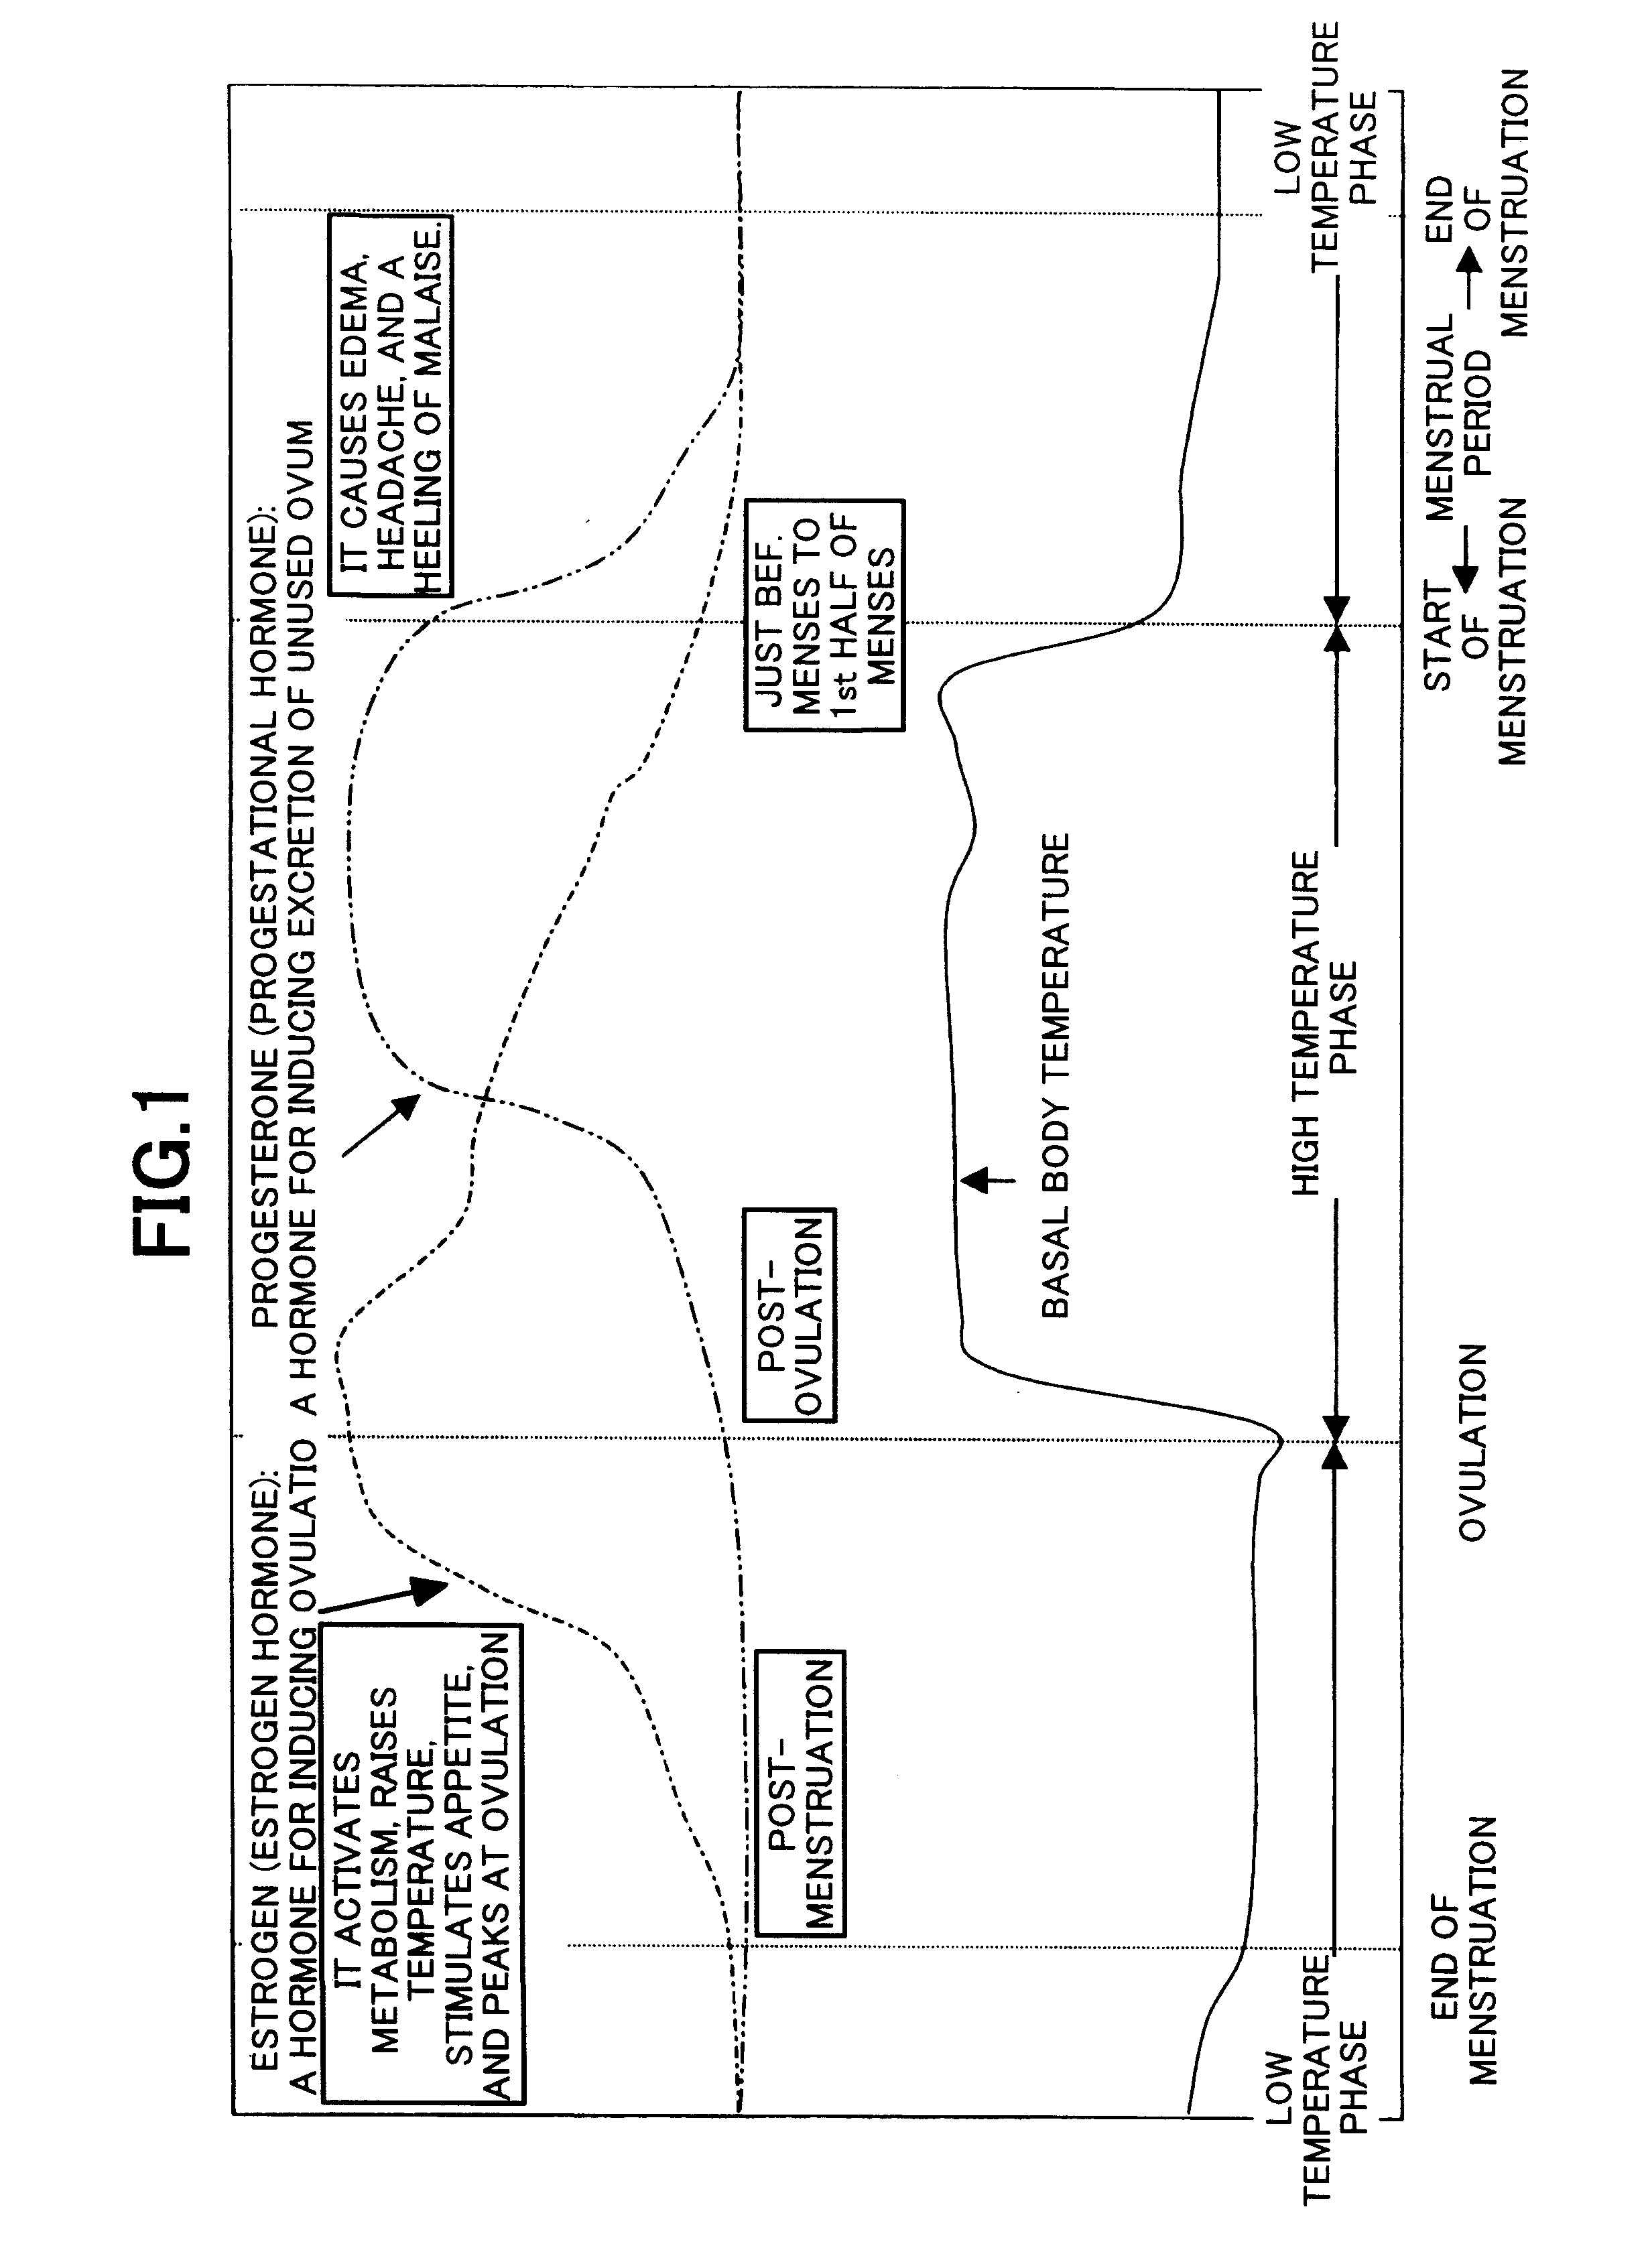 Method of making a decision on the monthly physiological condition of a female body, apparatus which makes such decision, and apparatus which produces some data for such decision